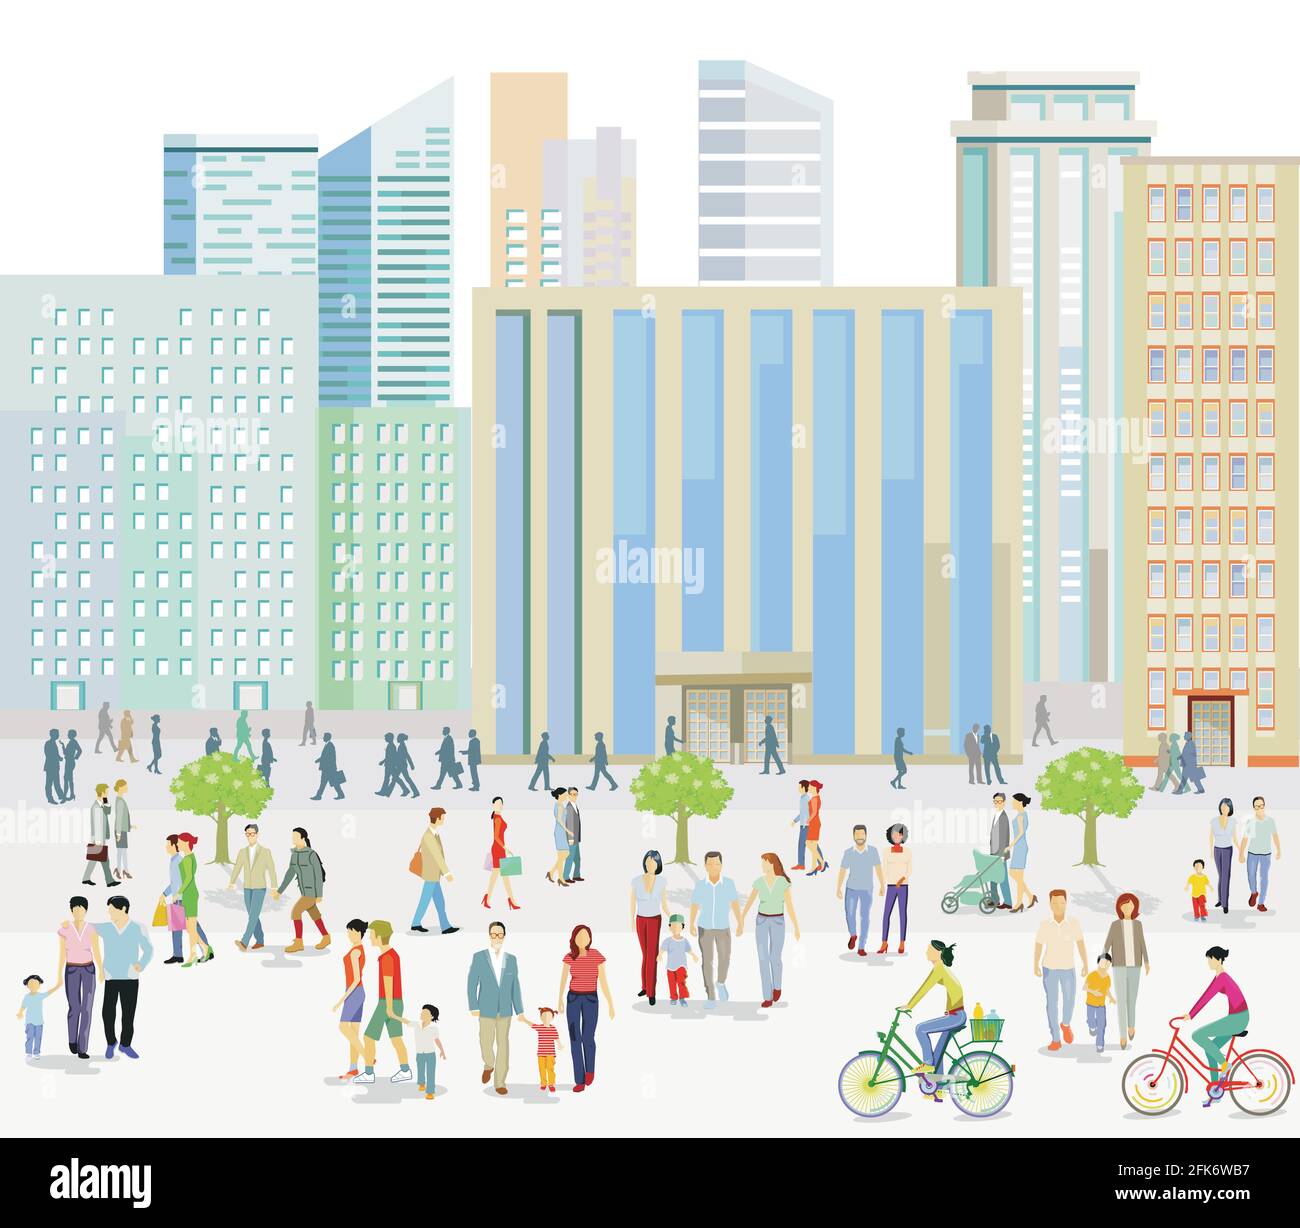 Big city with People on the sidewalk illustration Stock Vector